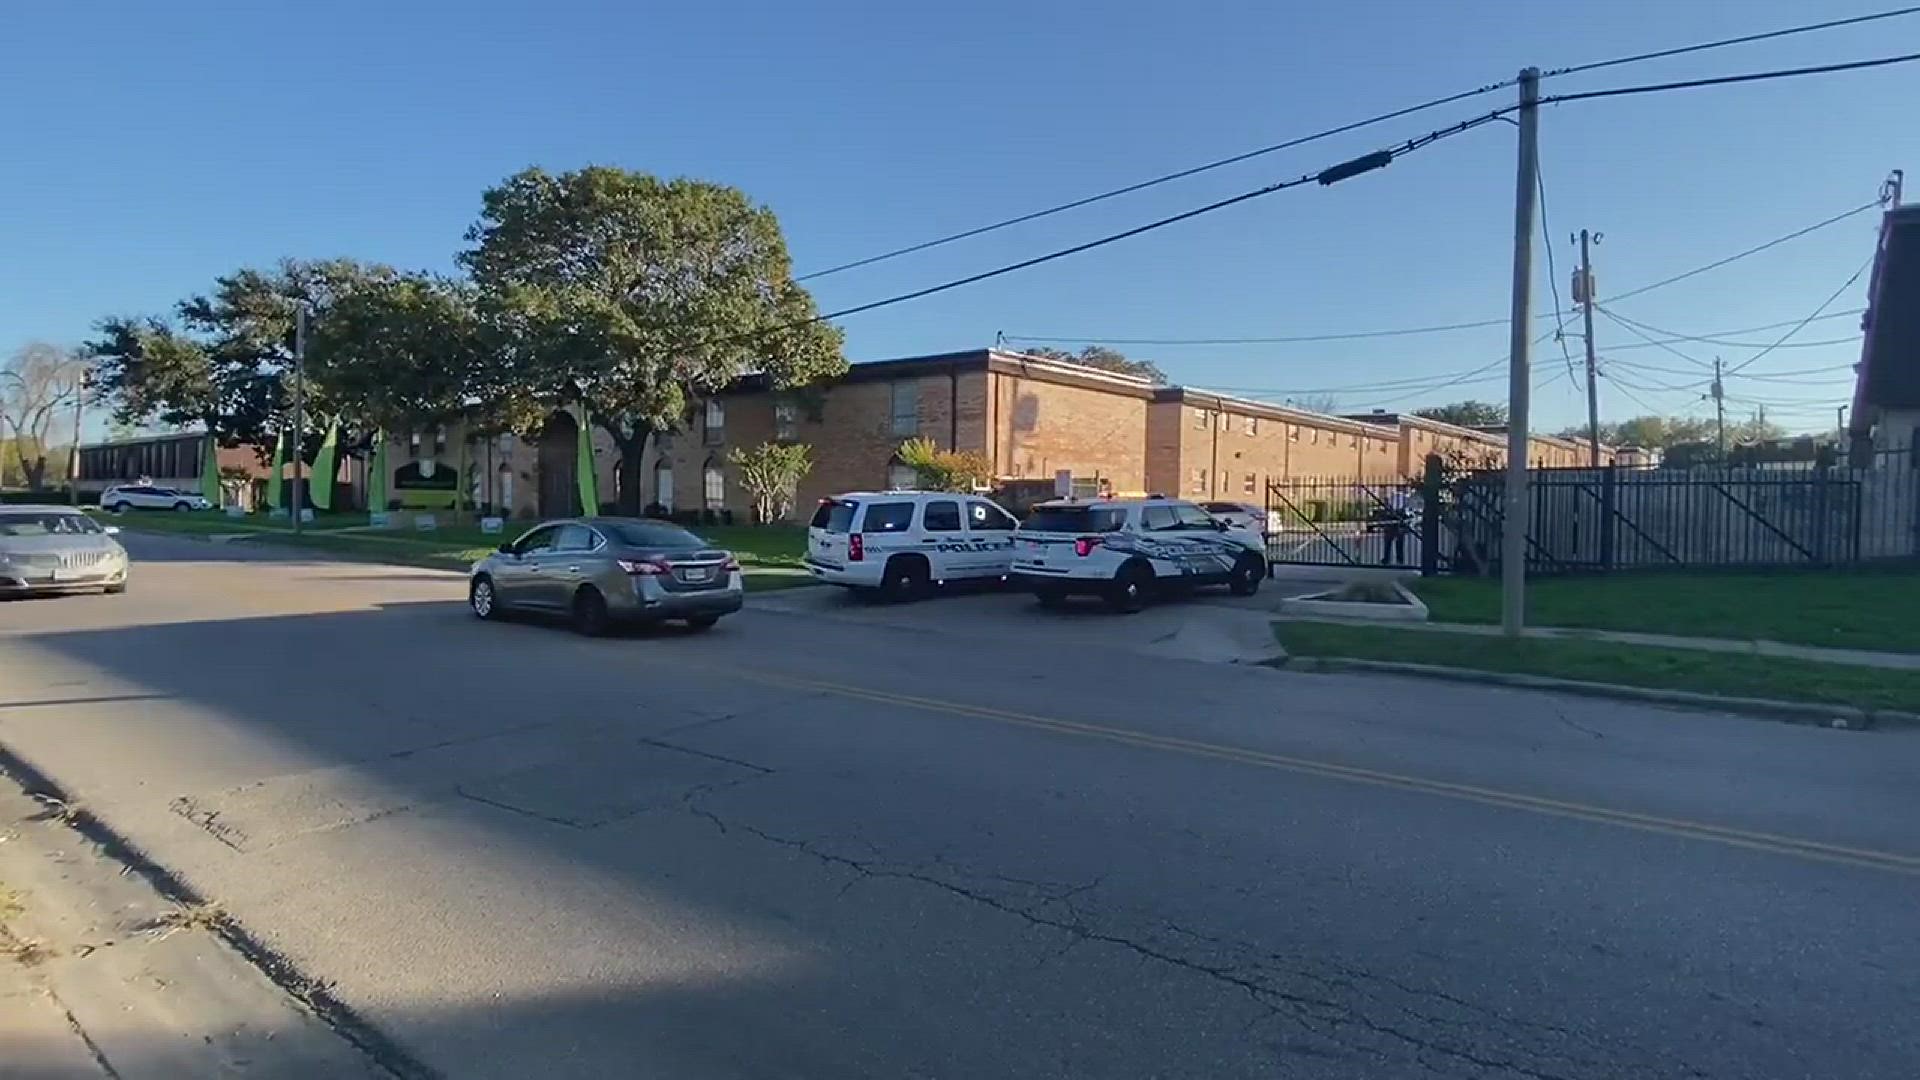 The man who was taken to the hospital after he was shot outside a Killeen apartment complex on Monday has died, according to the Killeen Police Department.
Credit: KCEN